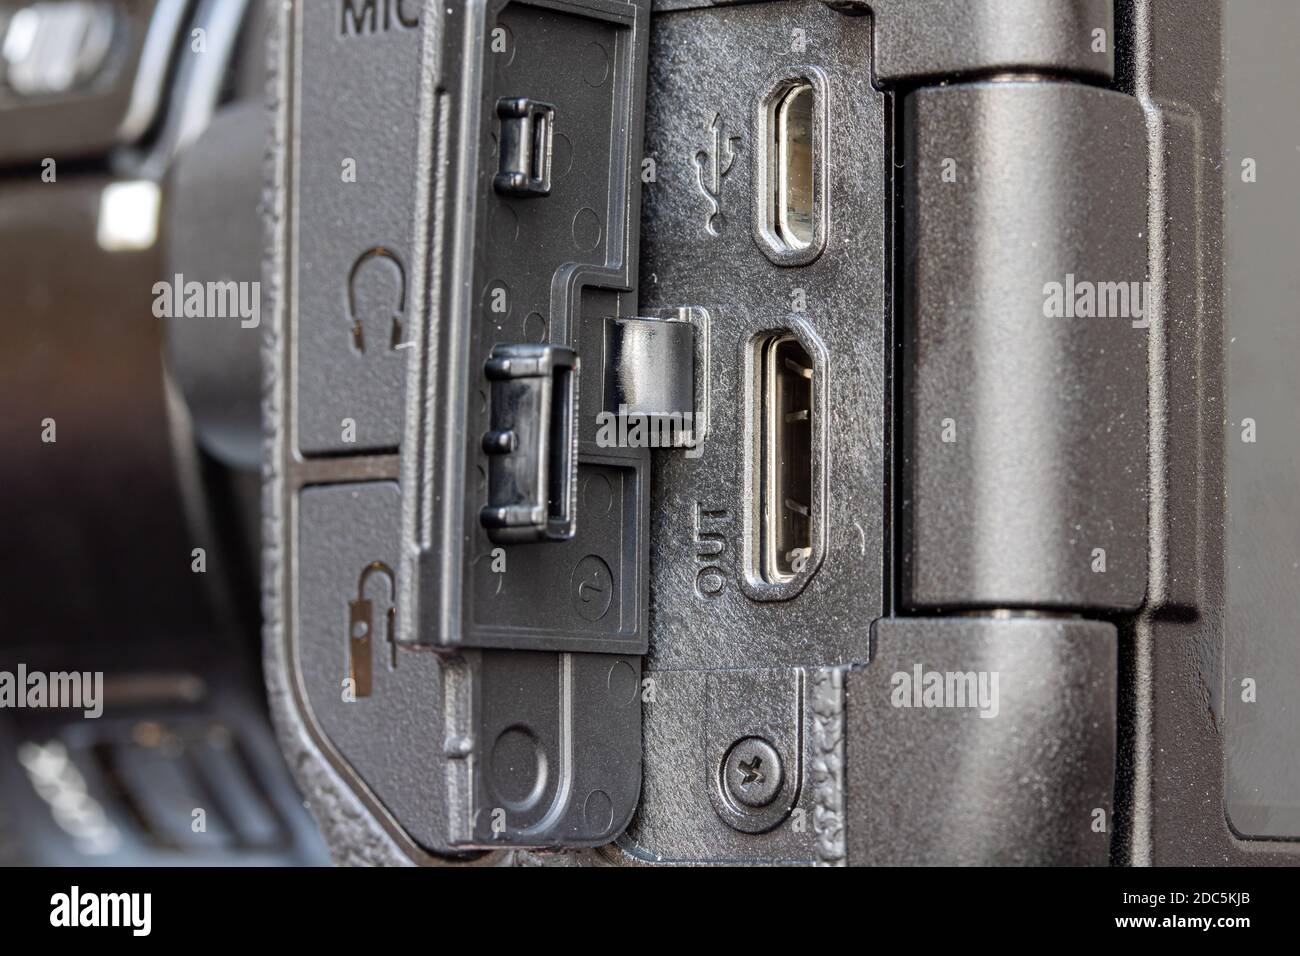 An open door on the side of the camera where is the slots for connection micro USB and mini HDMI. Stock Photo